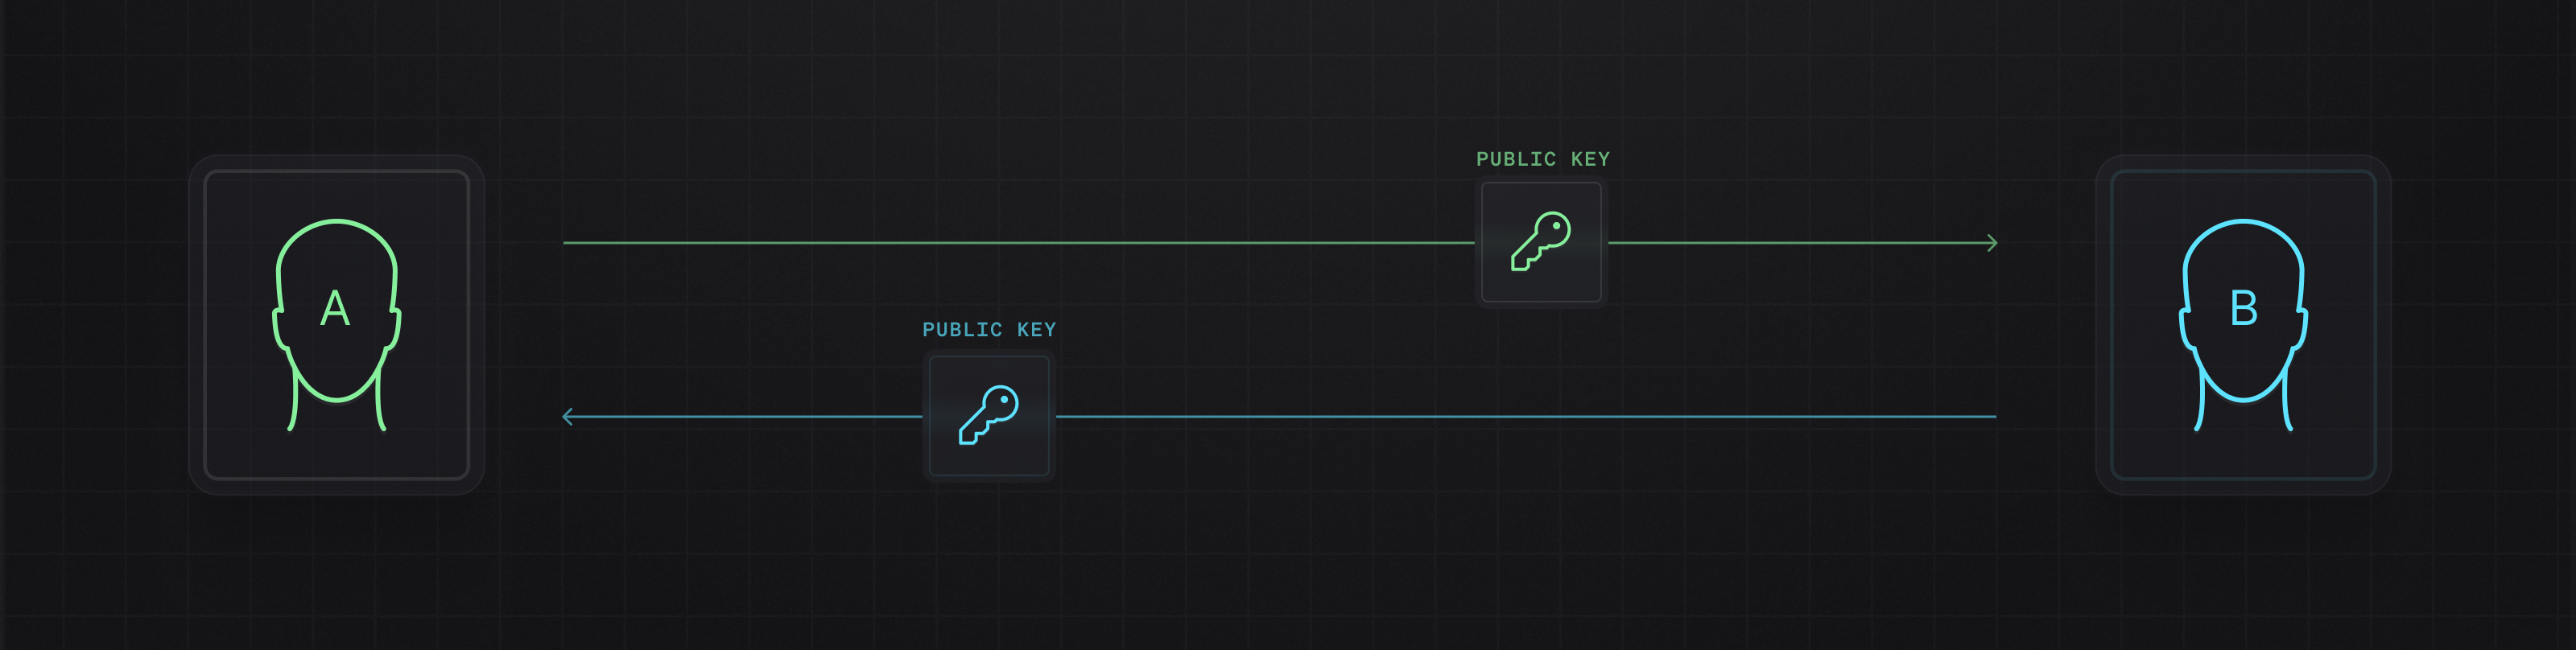 A diagram showing how public keys are exchanged between Ava and Brent.